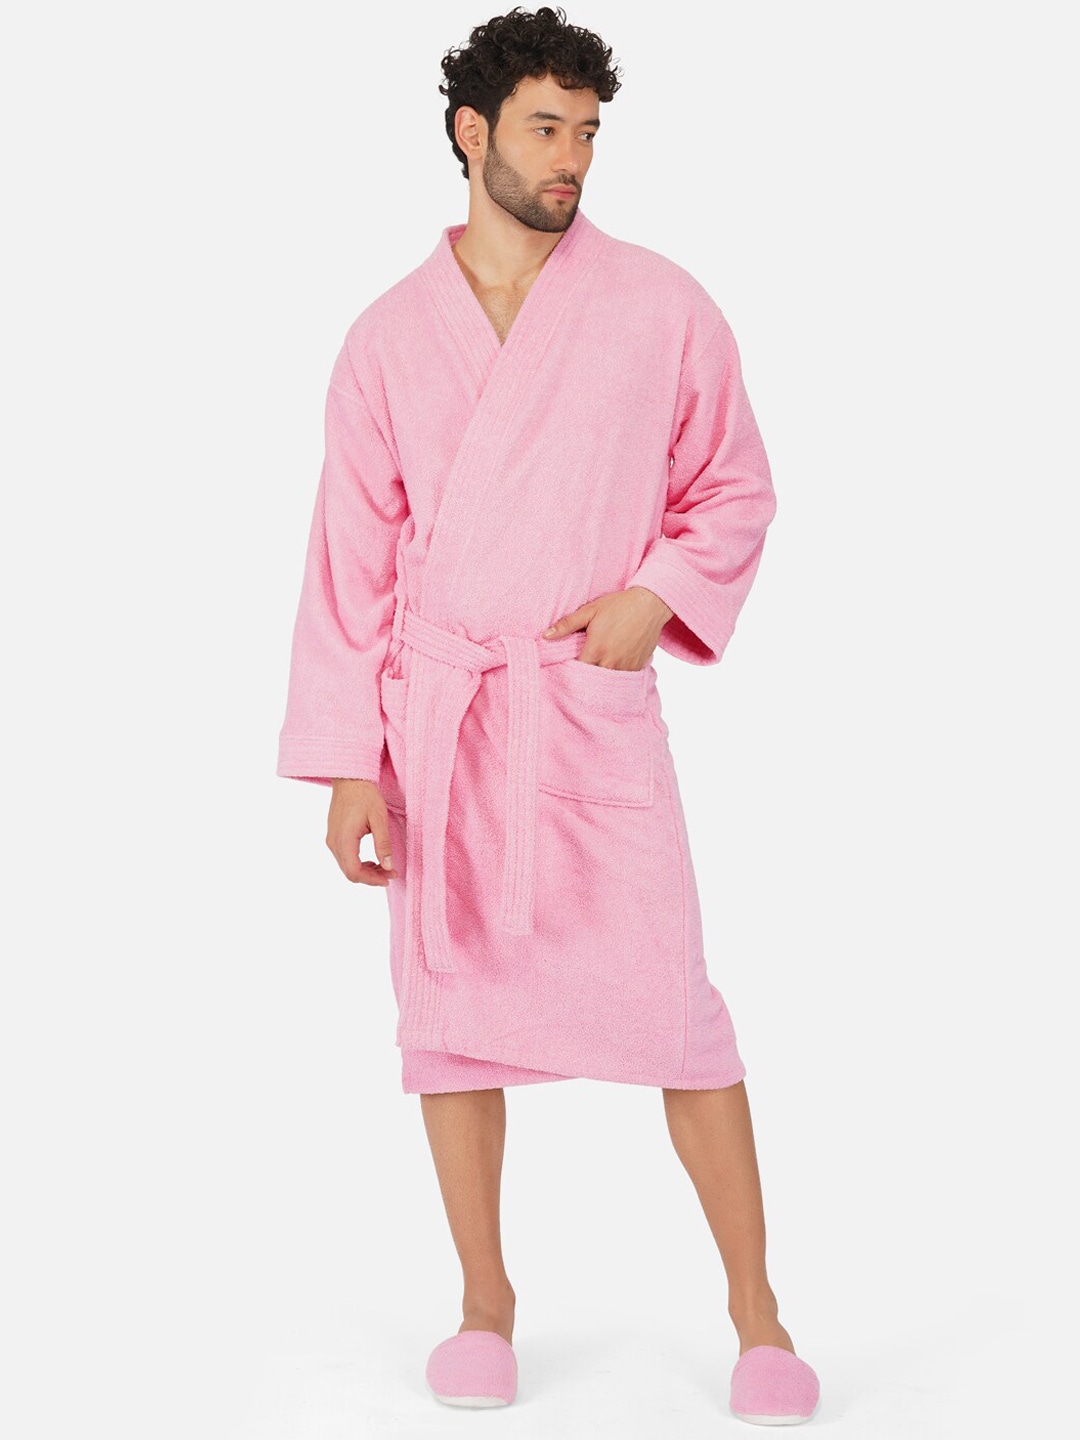 RANGOLI Unisex Pink Pure Cotton 400 GSM Large Bath Robe with Slippers Price in India